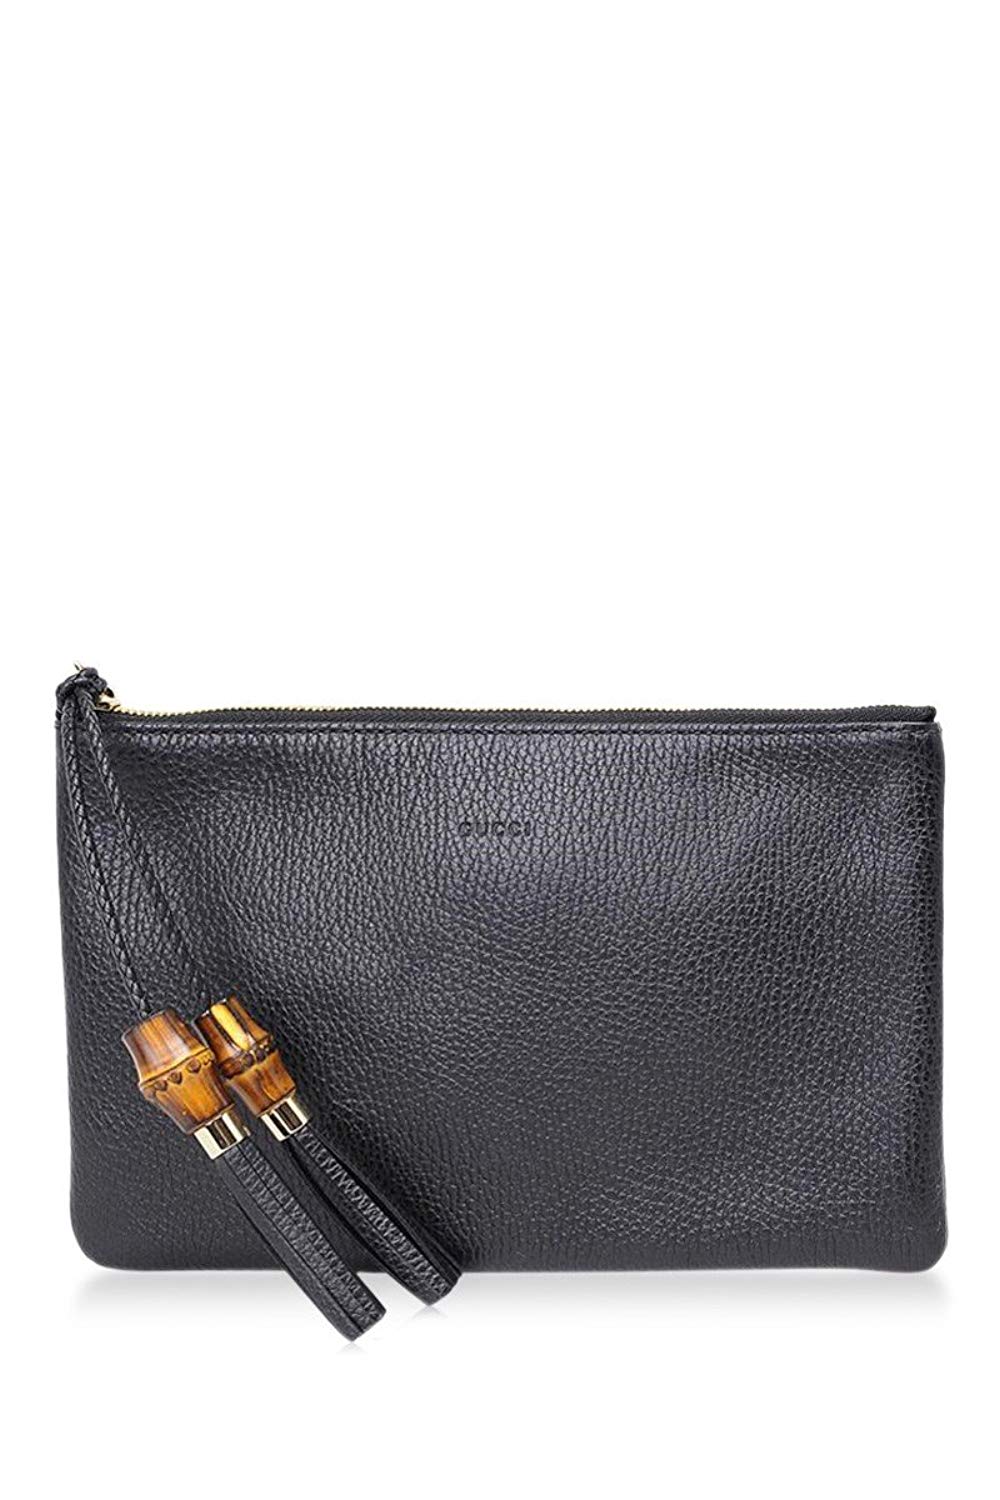 Gucci Bamboo Croisette Evening Bag Leather Black 1638621